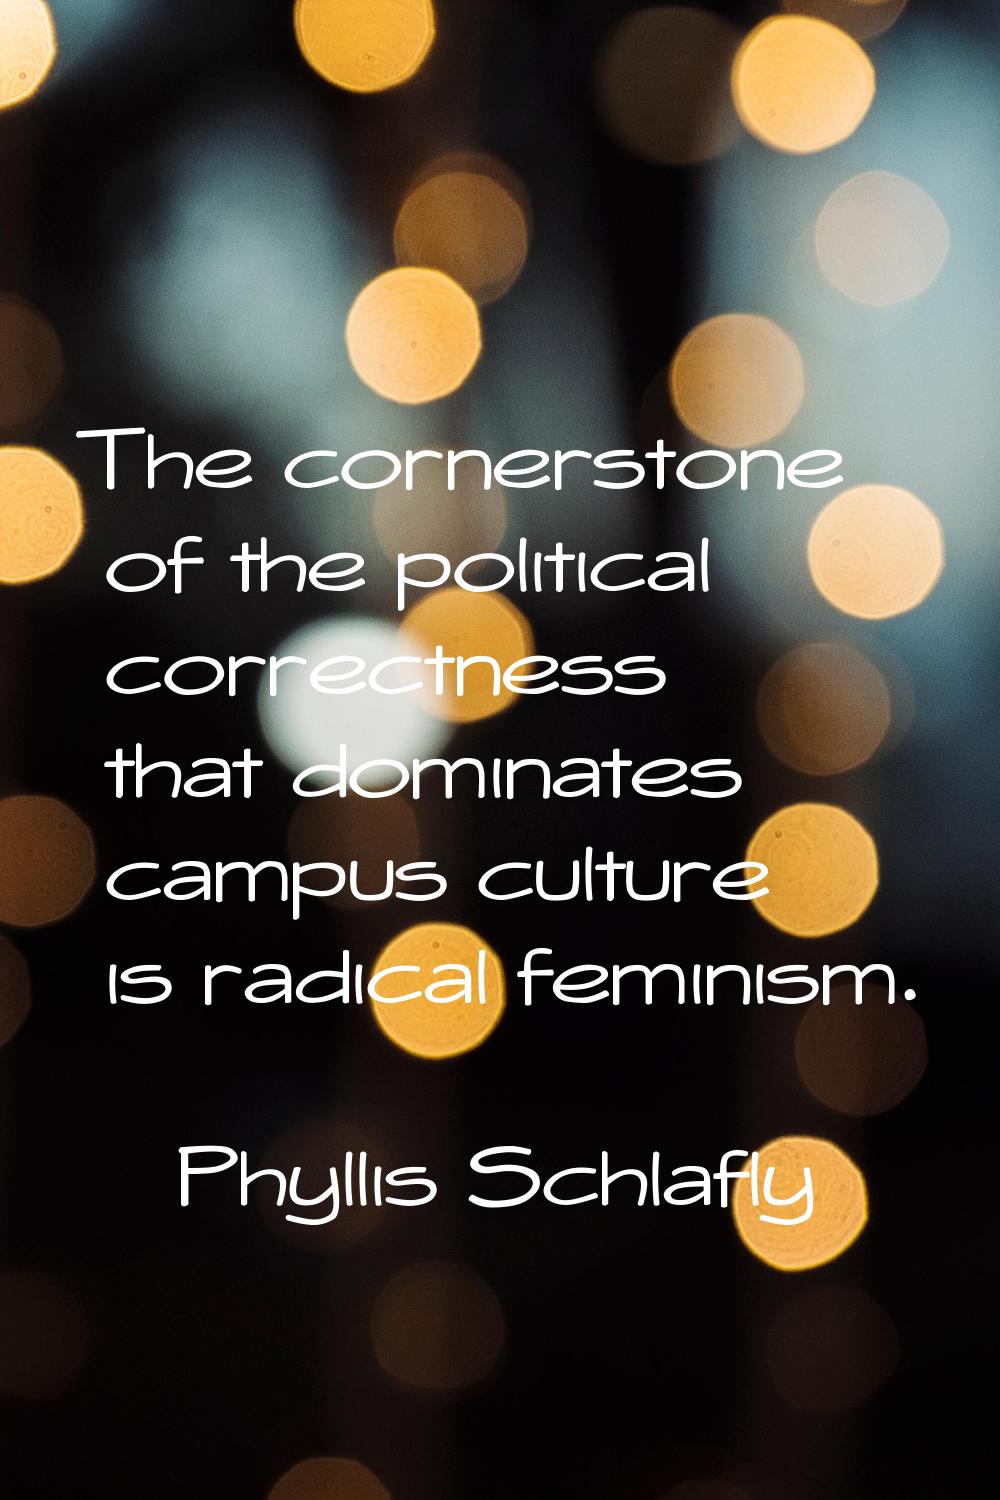 The cornerstone of the political correctness that dominates campus culture is radical feminism.